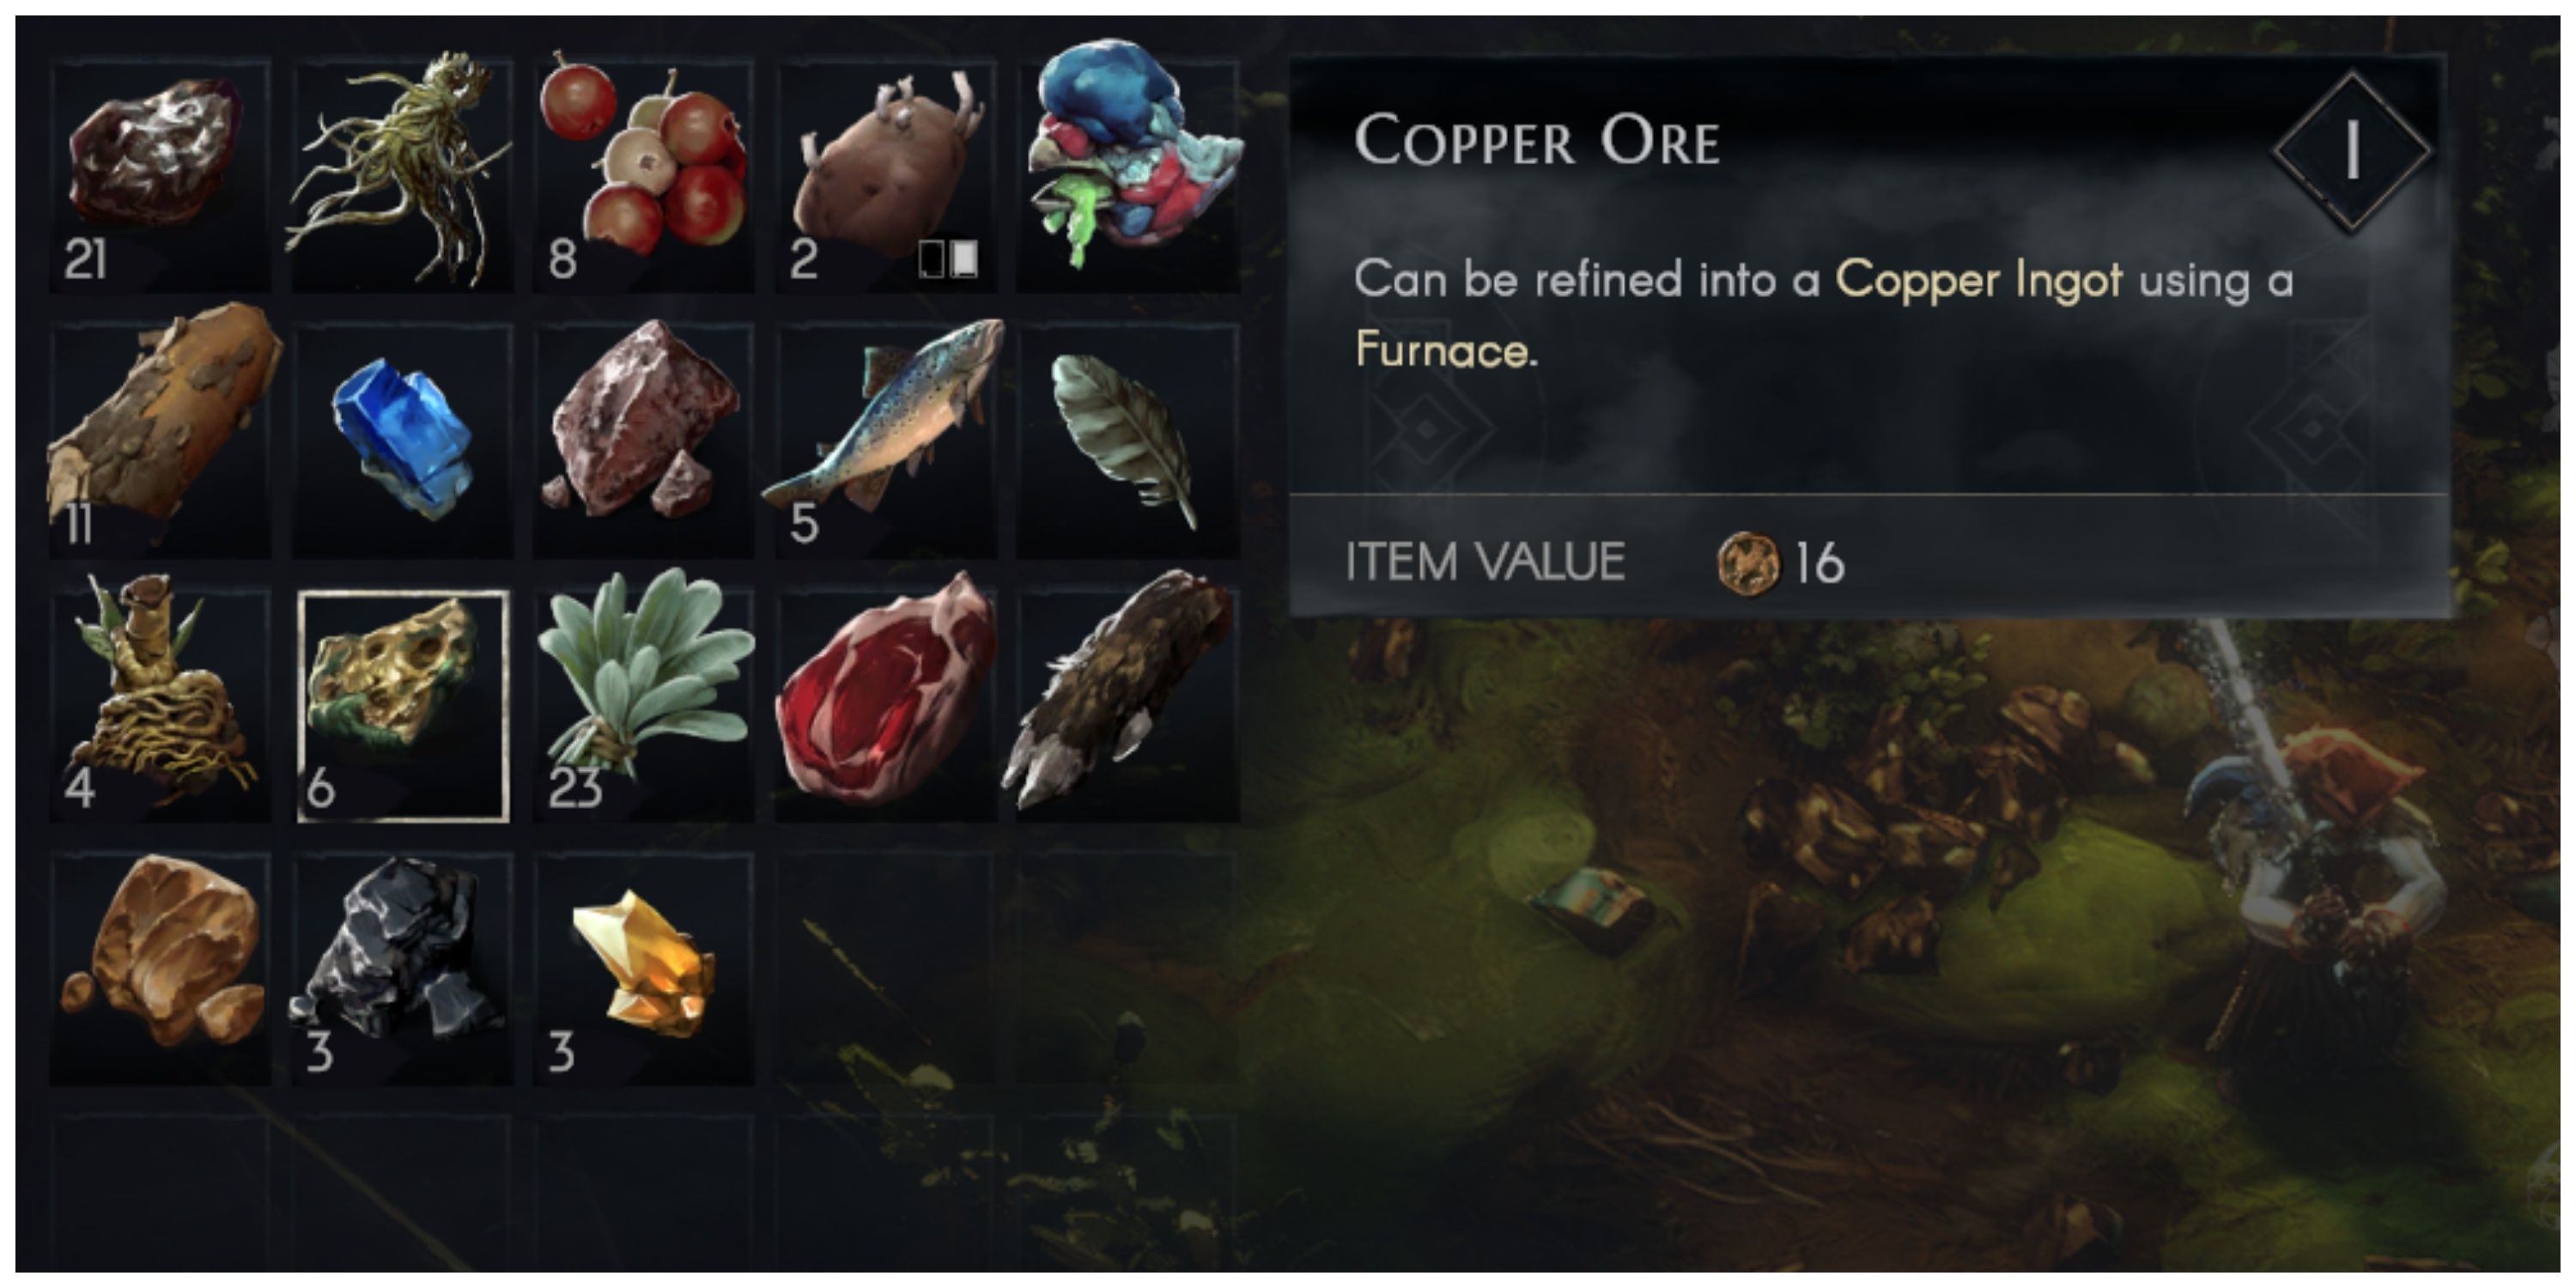 No Rest For The Wicked - Copper Ore